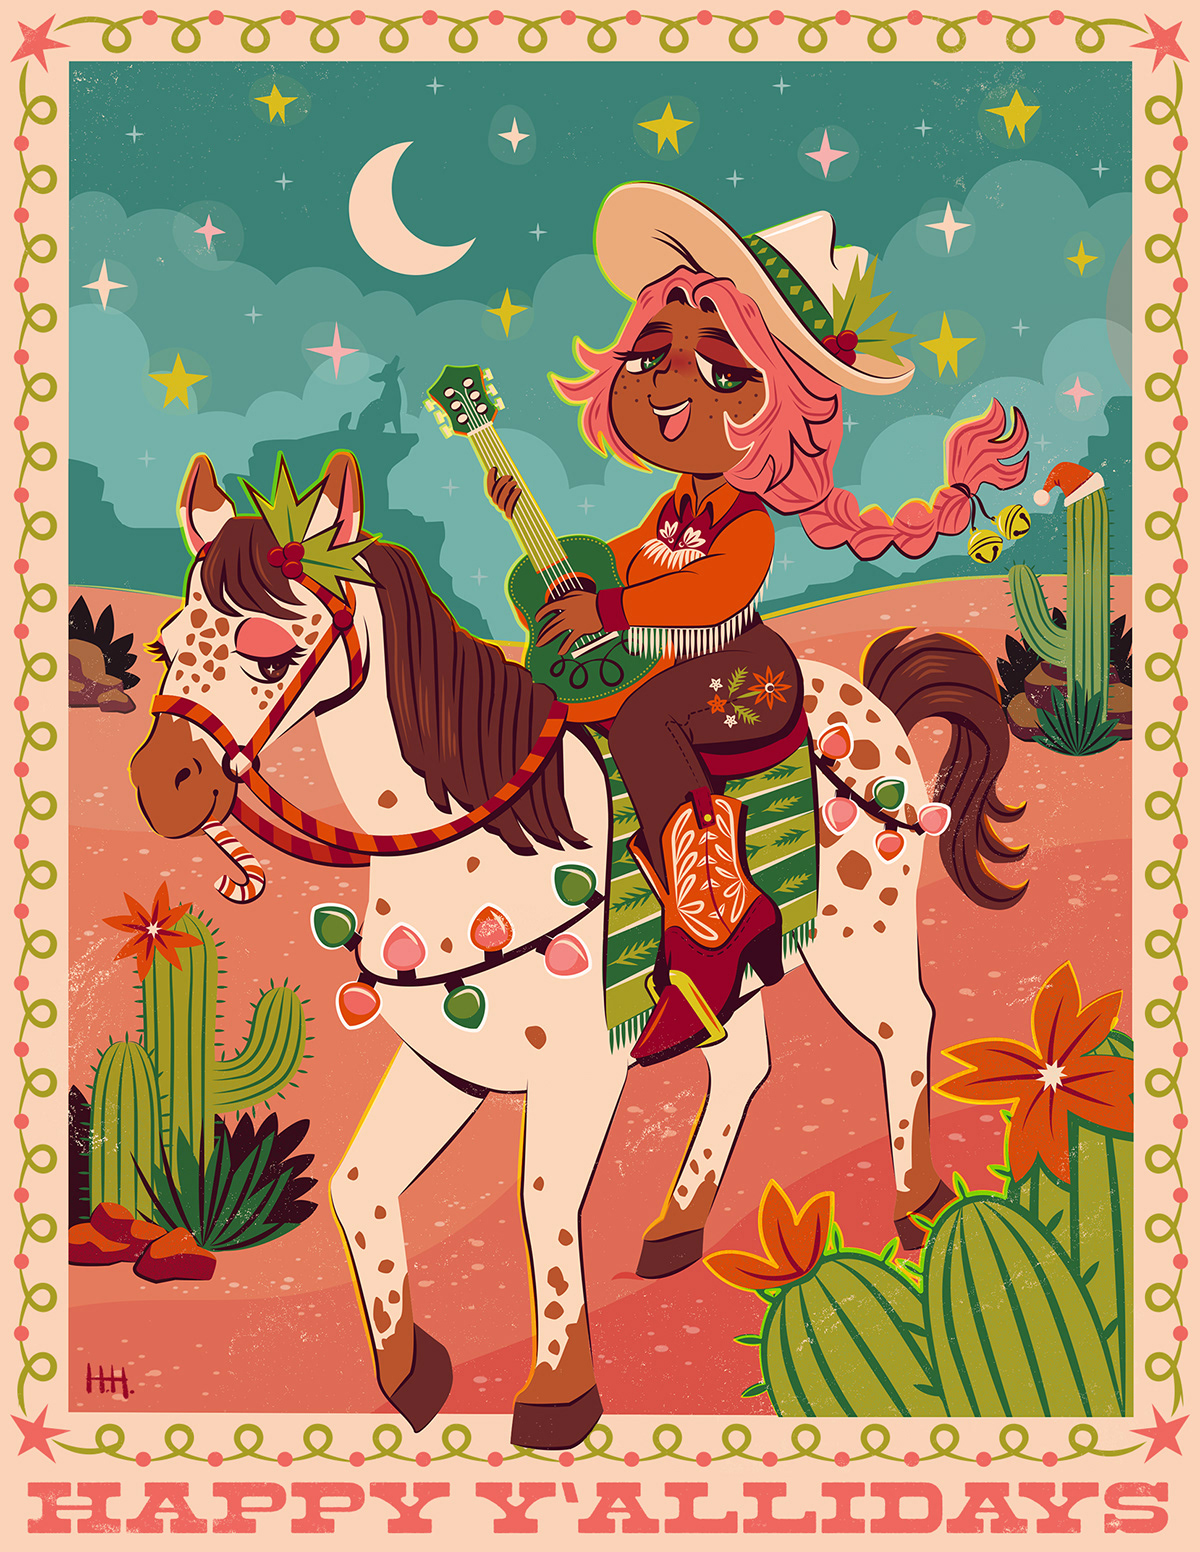 A festive cowgirl riding her decorated horse through a desert at night- "Happy Y'allidays" below